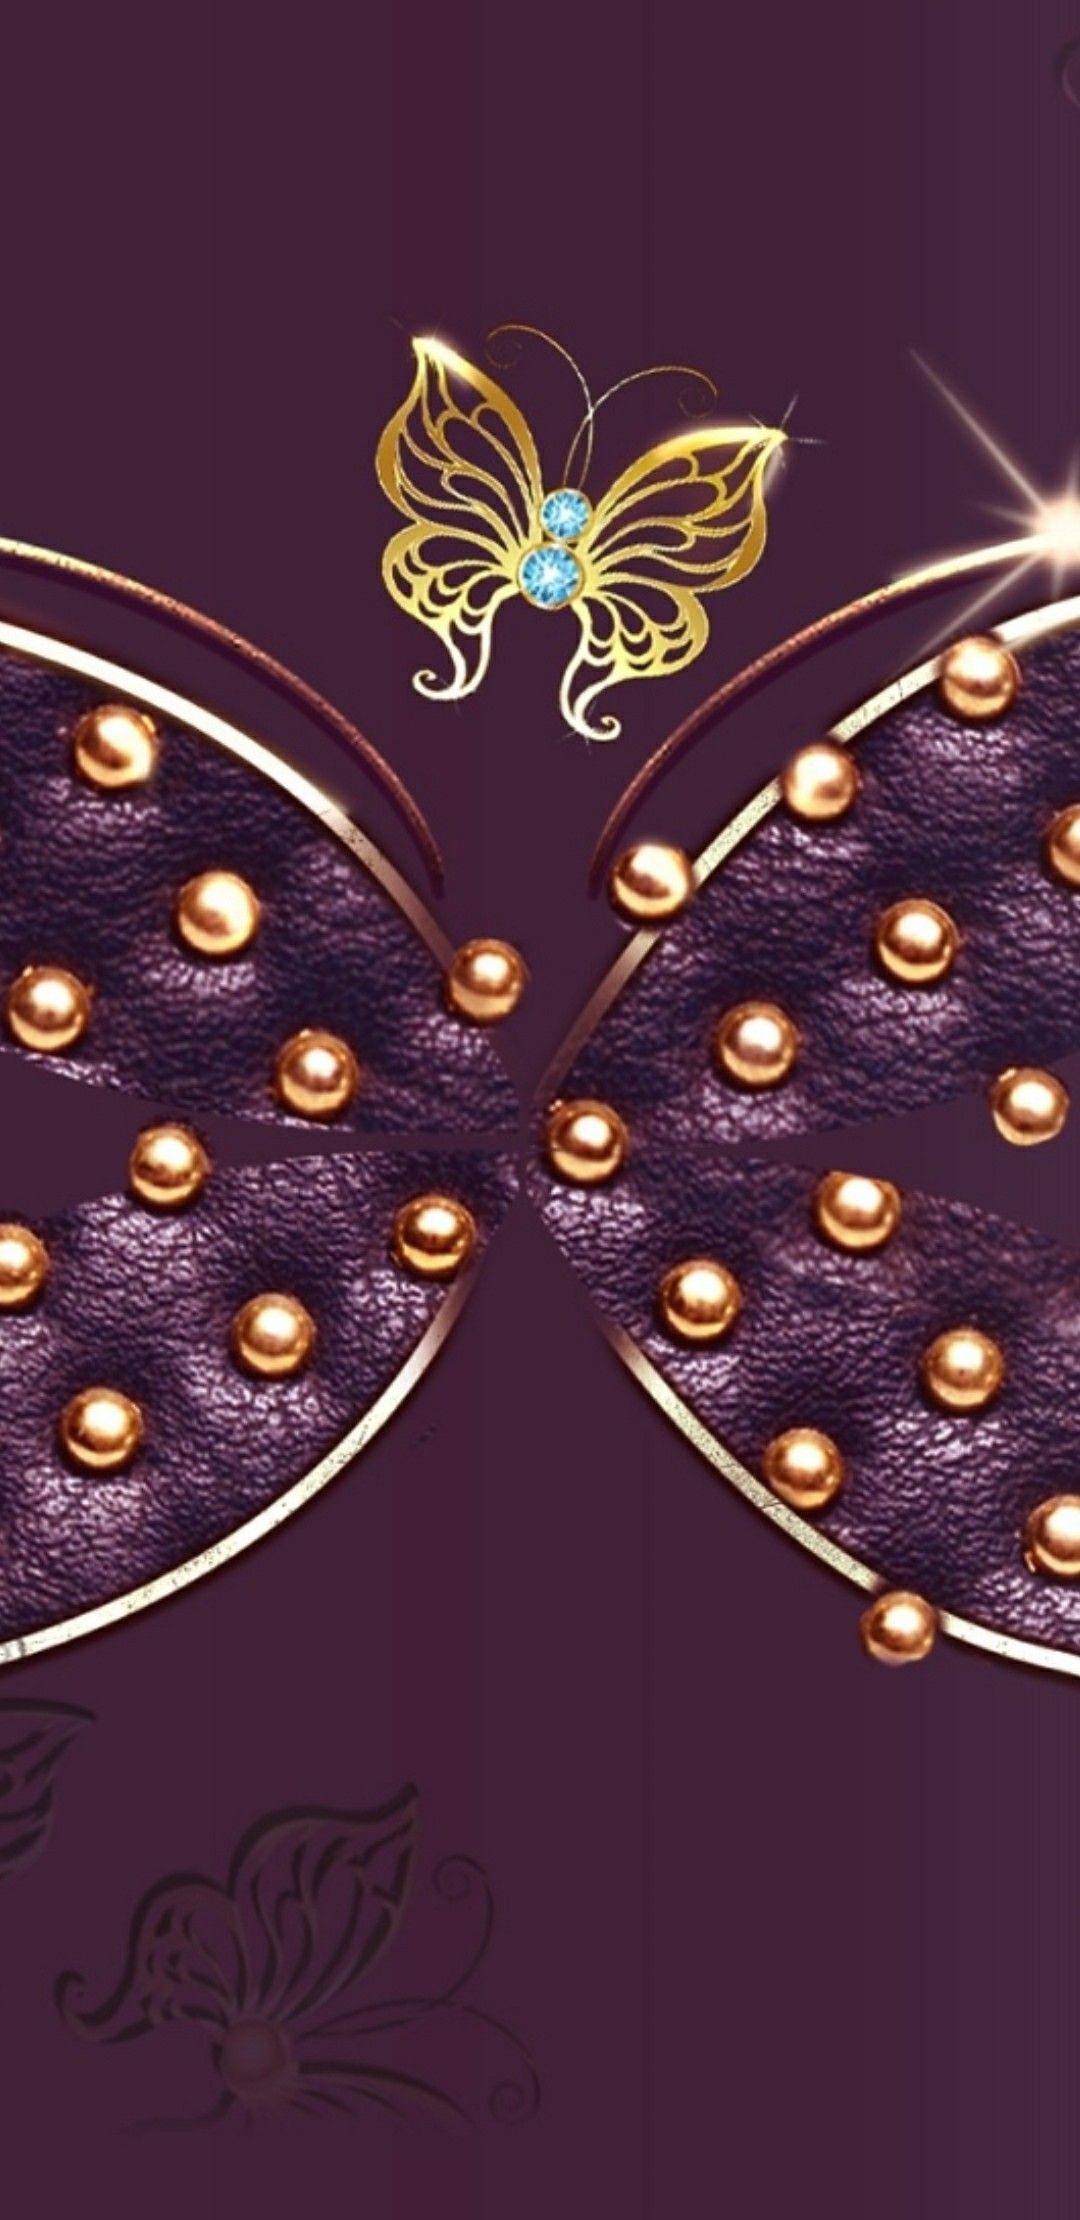 1080x2220 Purple and gold | Butterfly wallpaper iphone, Bling wallpaper, Butterfly wallpaper